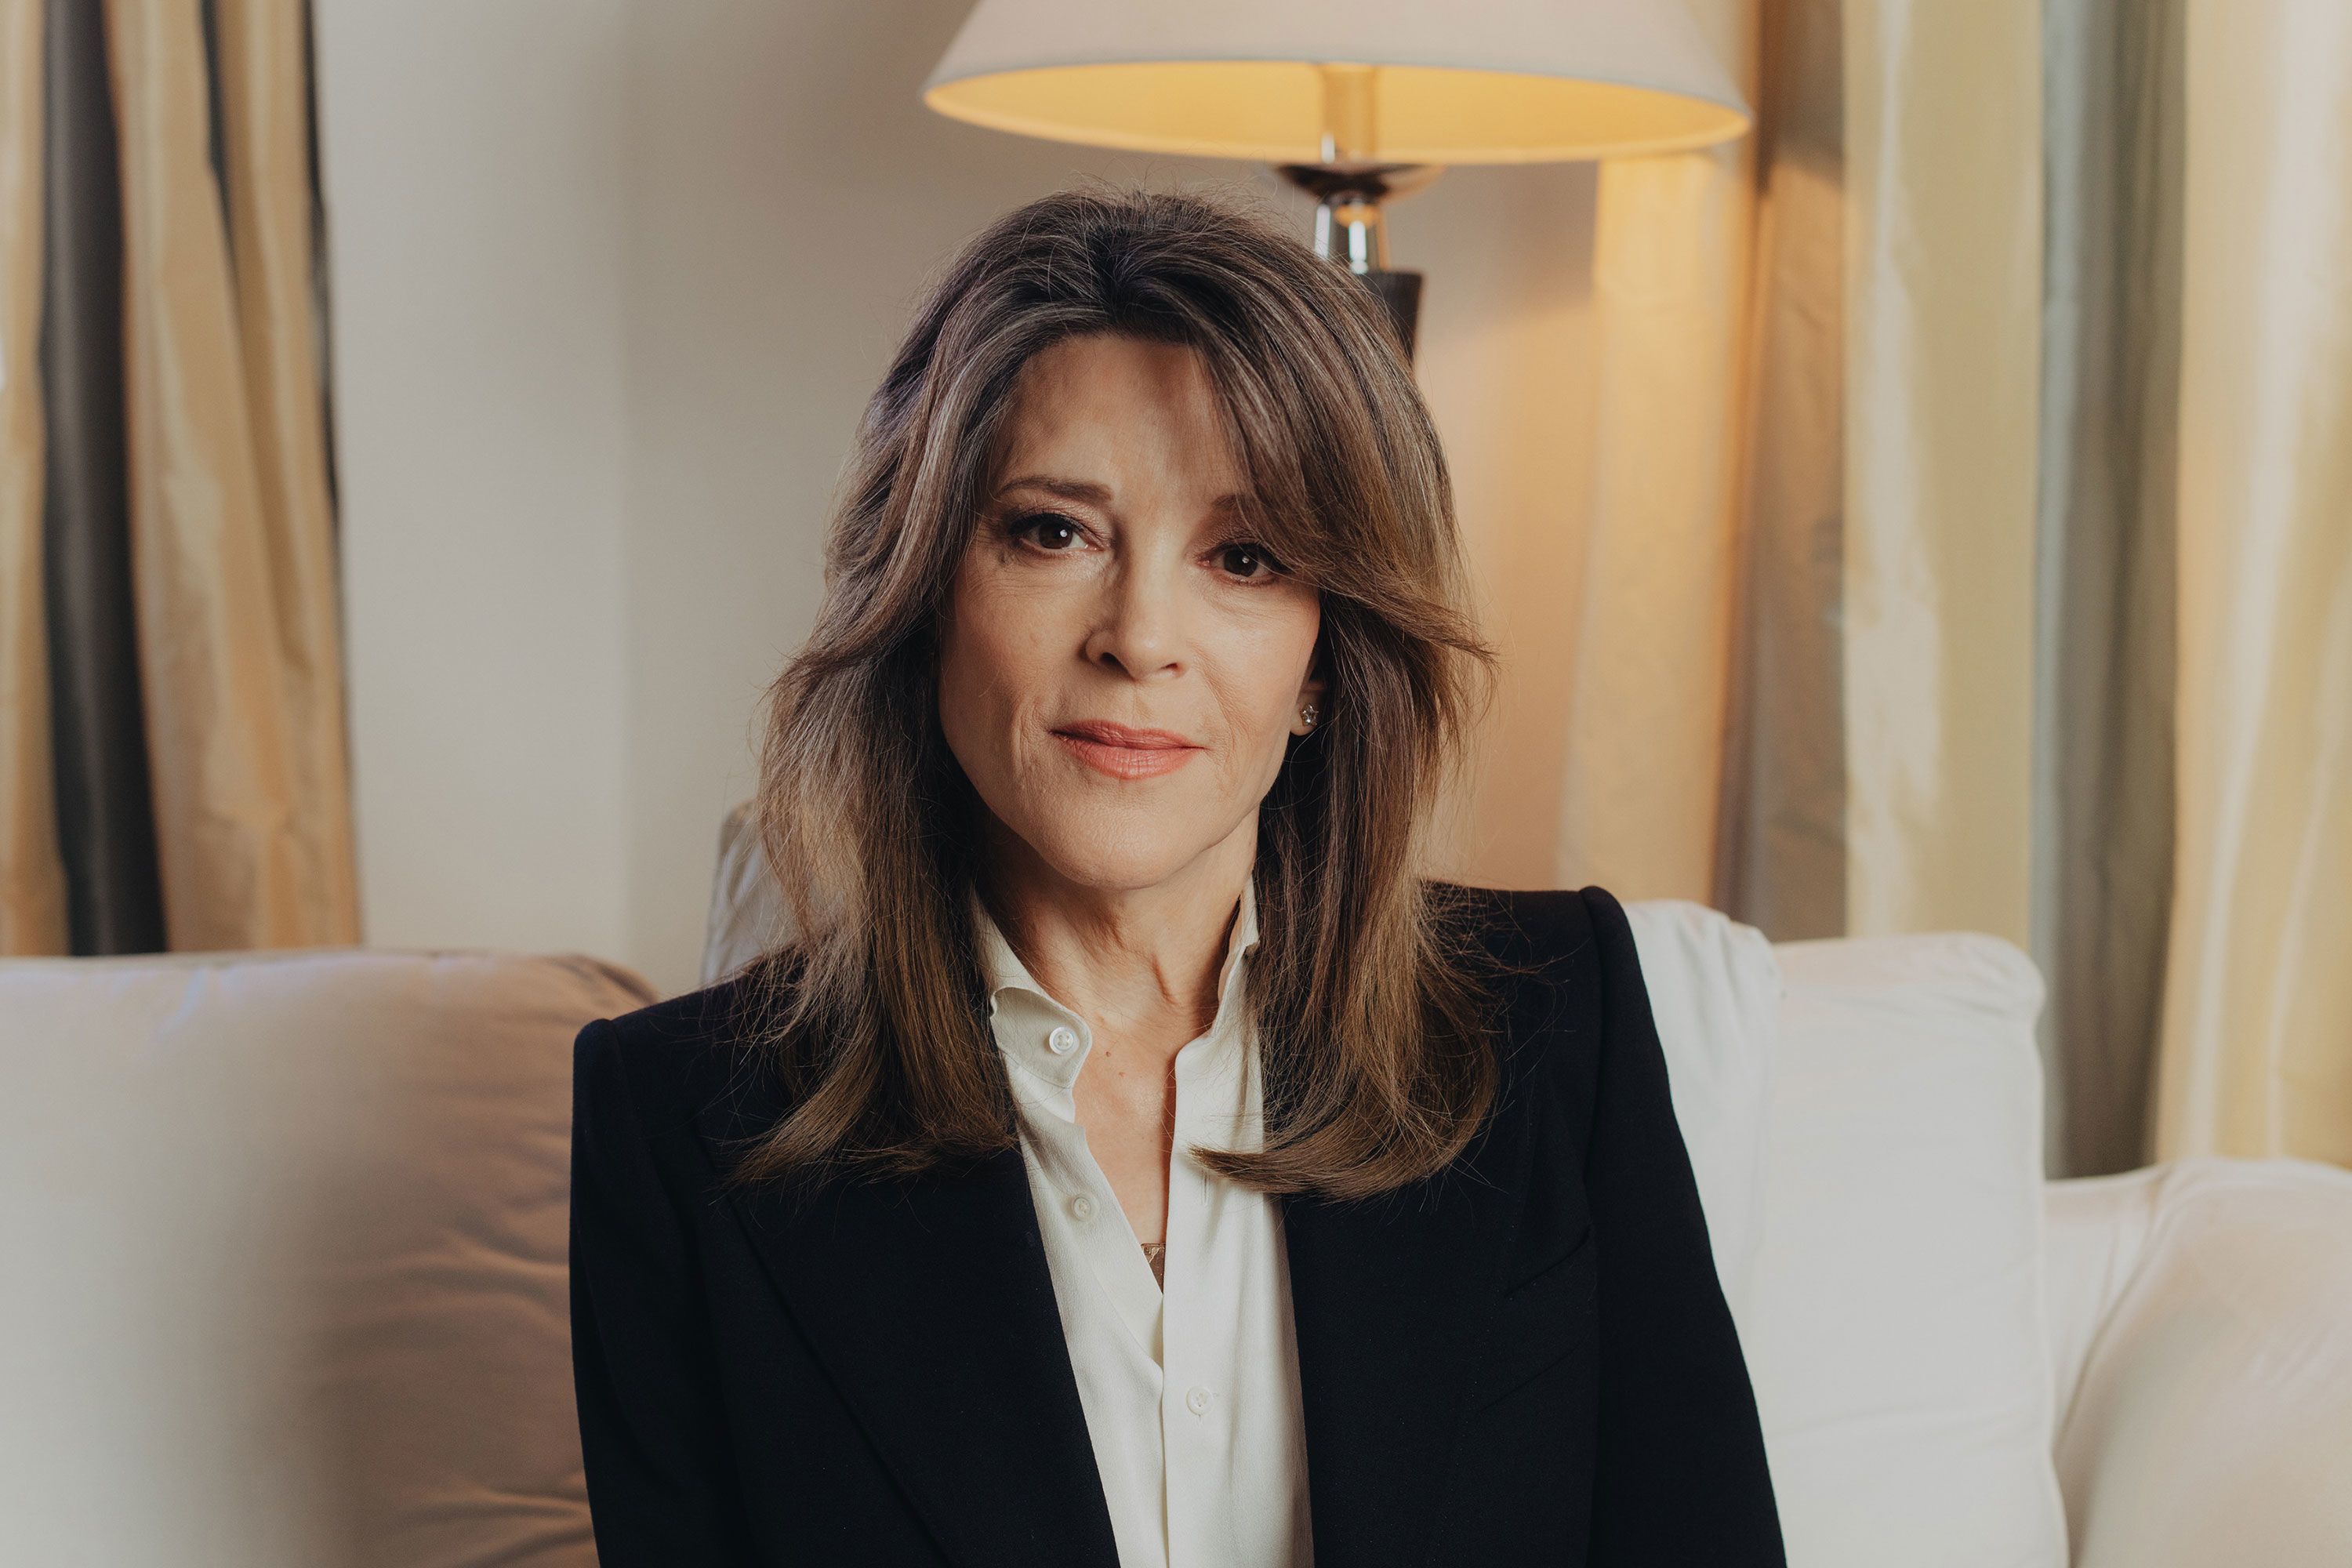 Marianne Williamson poses for a portrait in Los Angeles in January 2019.